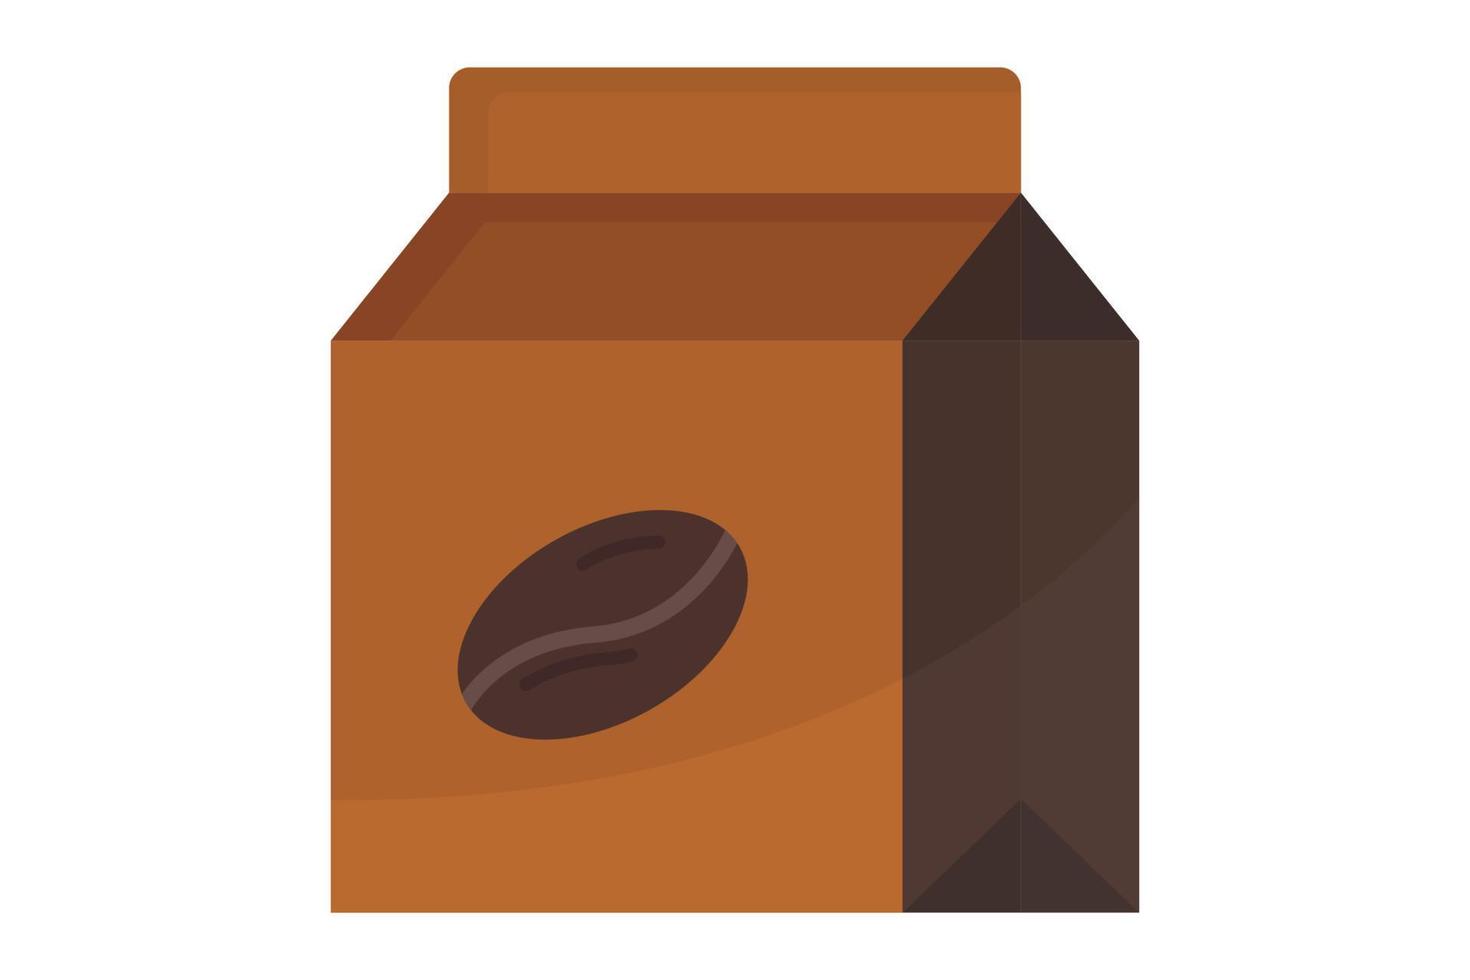 Coffee sack icon illustration. icon related to coffee element. Flat icon style. Simple vector design editable